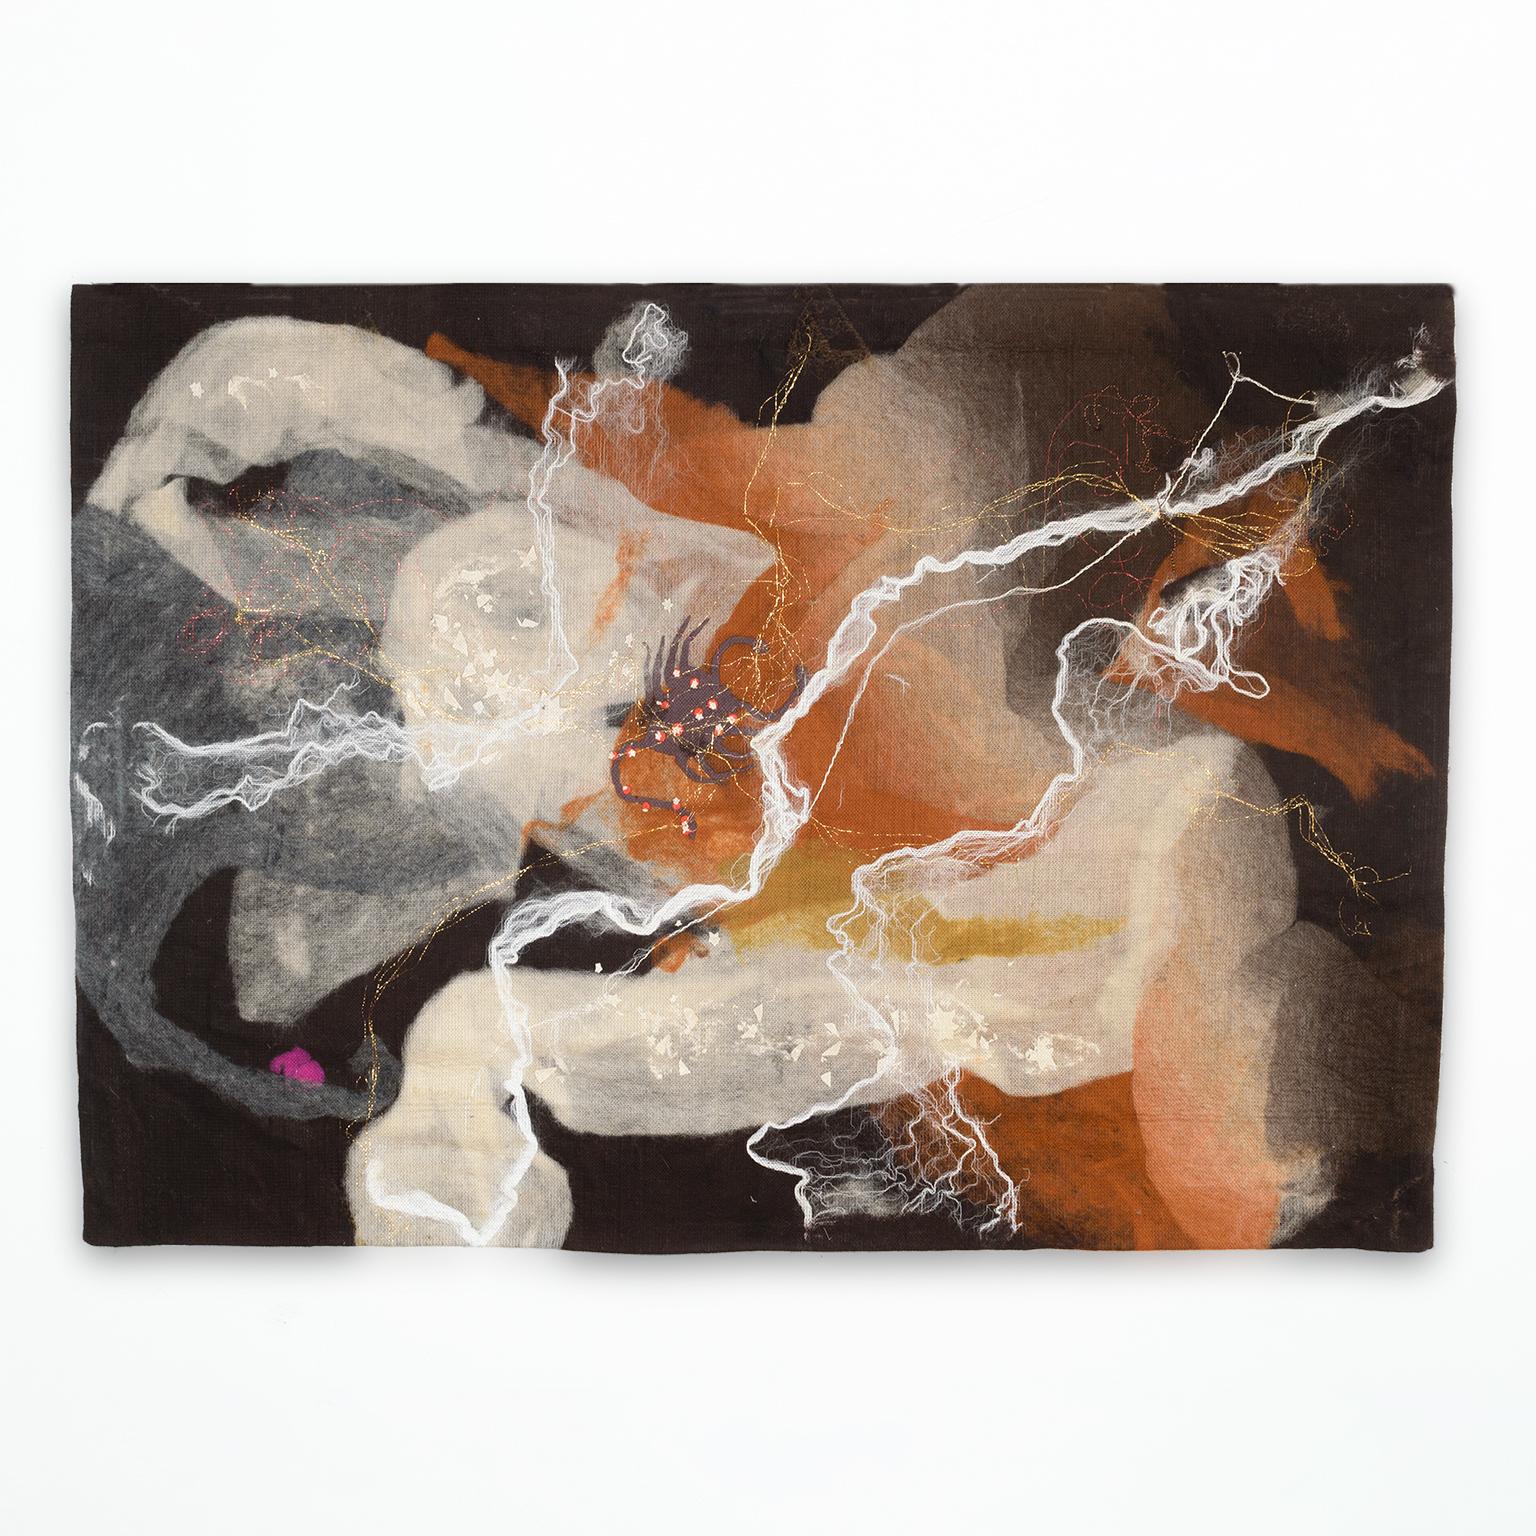 A Mid-Century Modern wall hanging/ tapestry of a dark landscape with a scorpion like creature in a field of brown, orange and tan. A dot of magenta in the lower left corner offsets the metallic gold and bright white threads. Made by Praha Atelier,